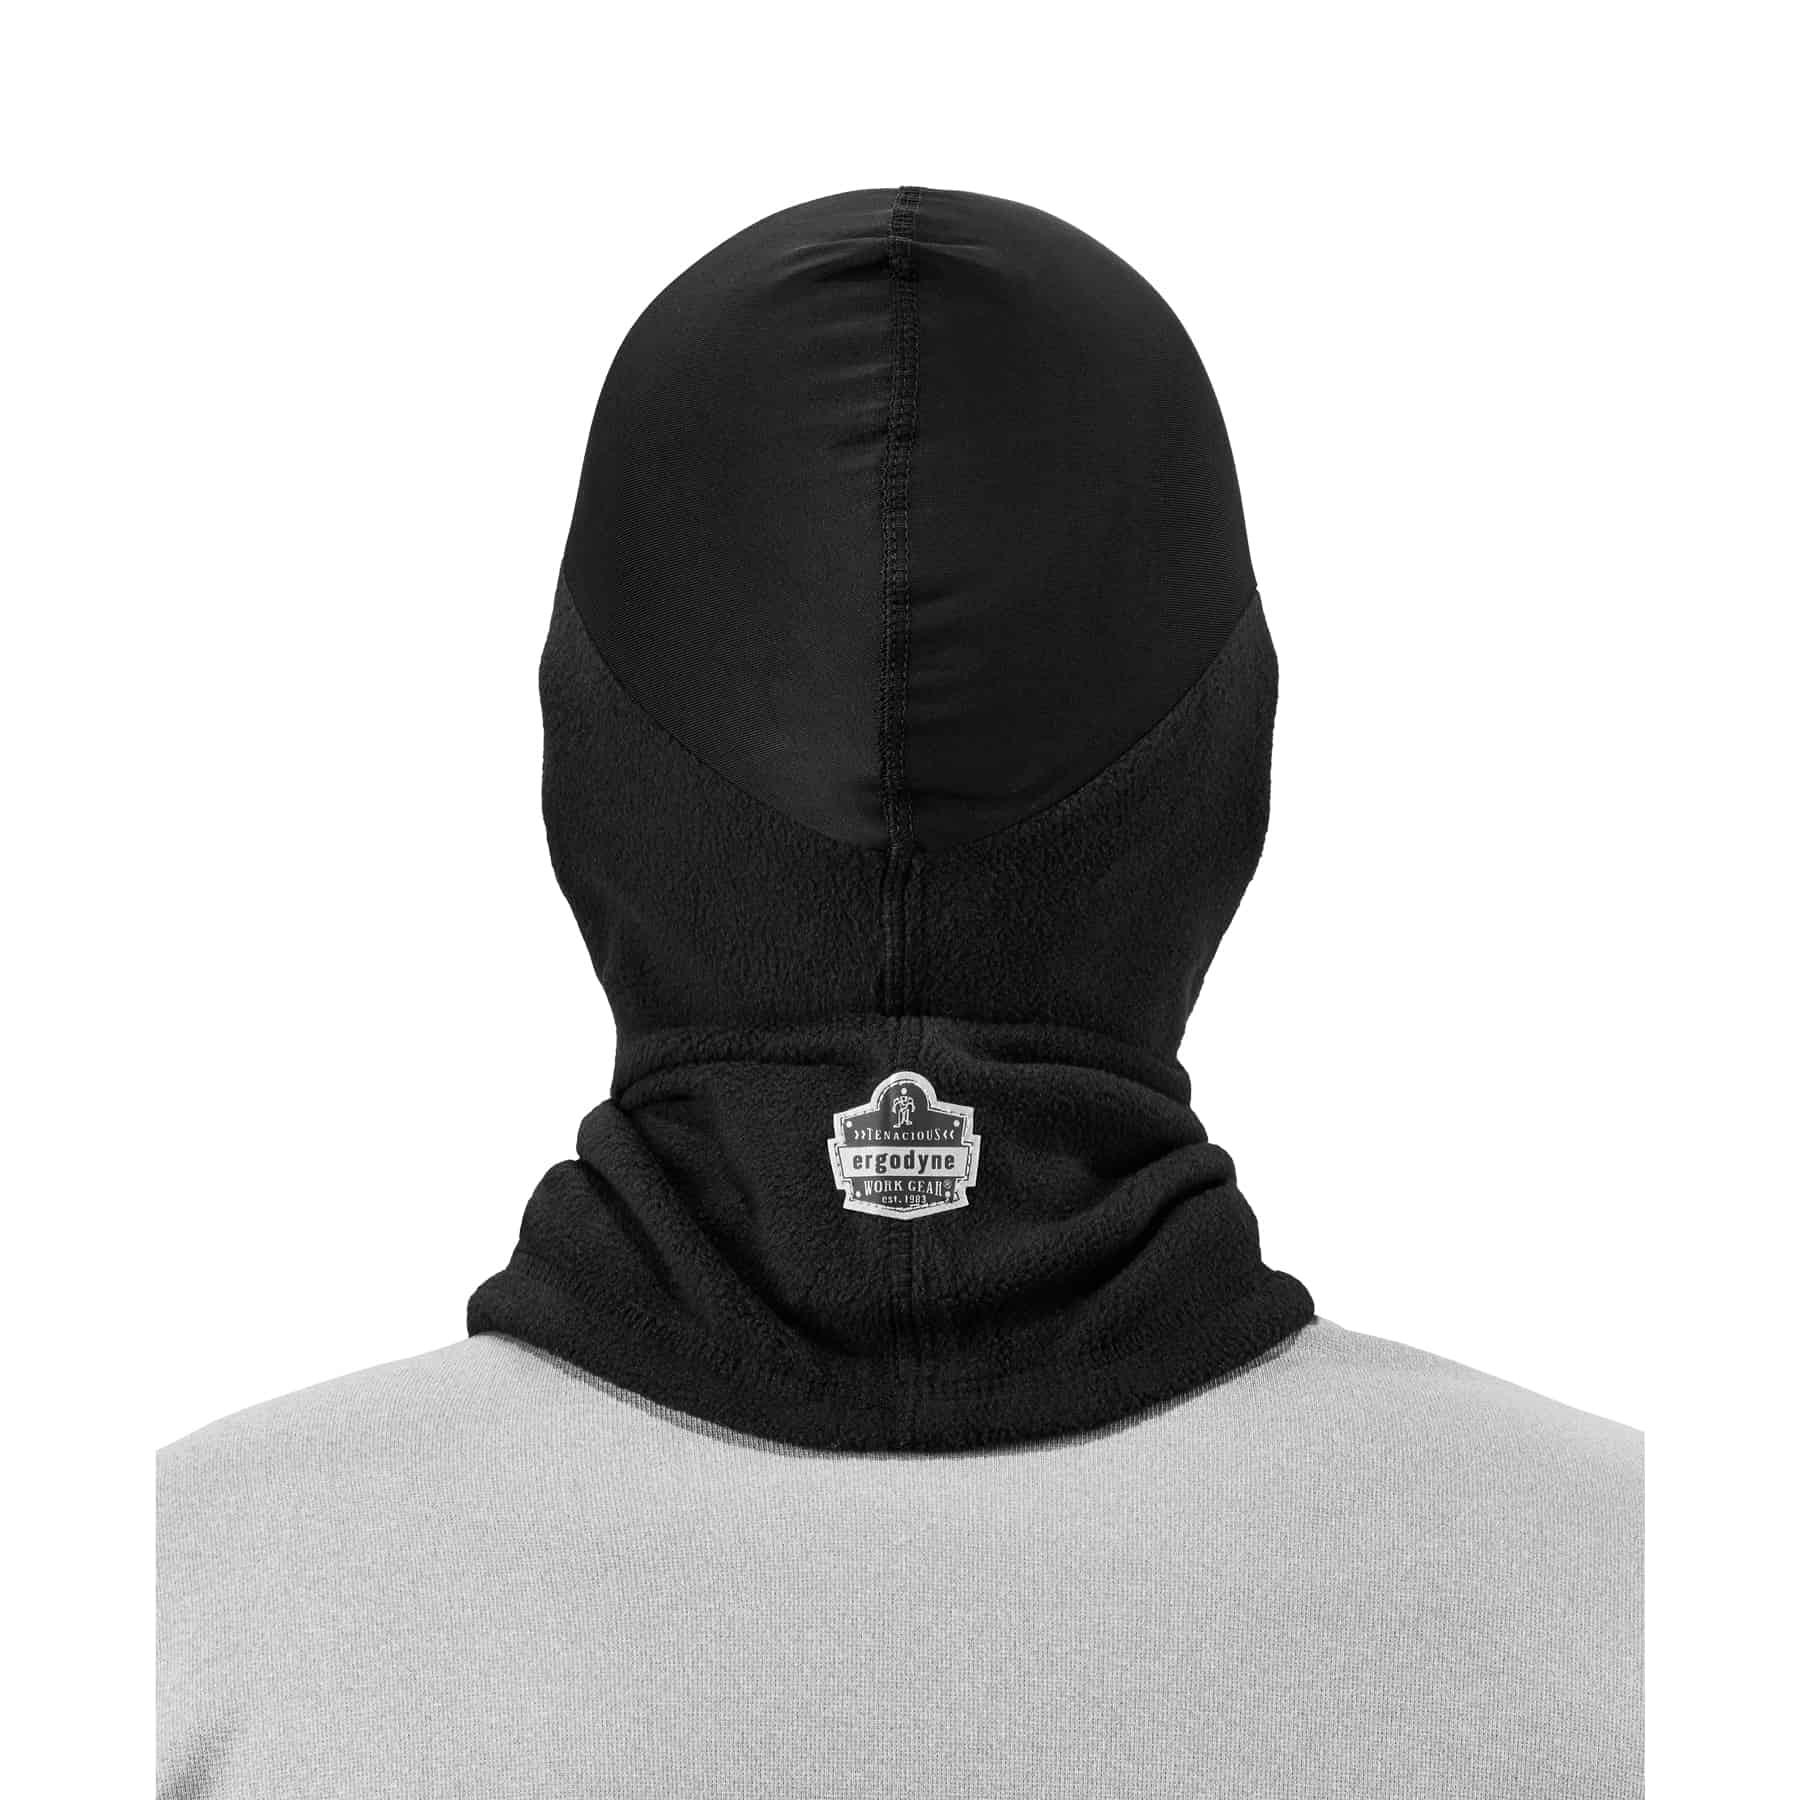 Balaclava Face Mask with Spandex Top